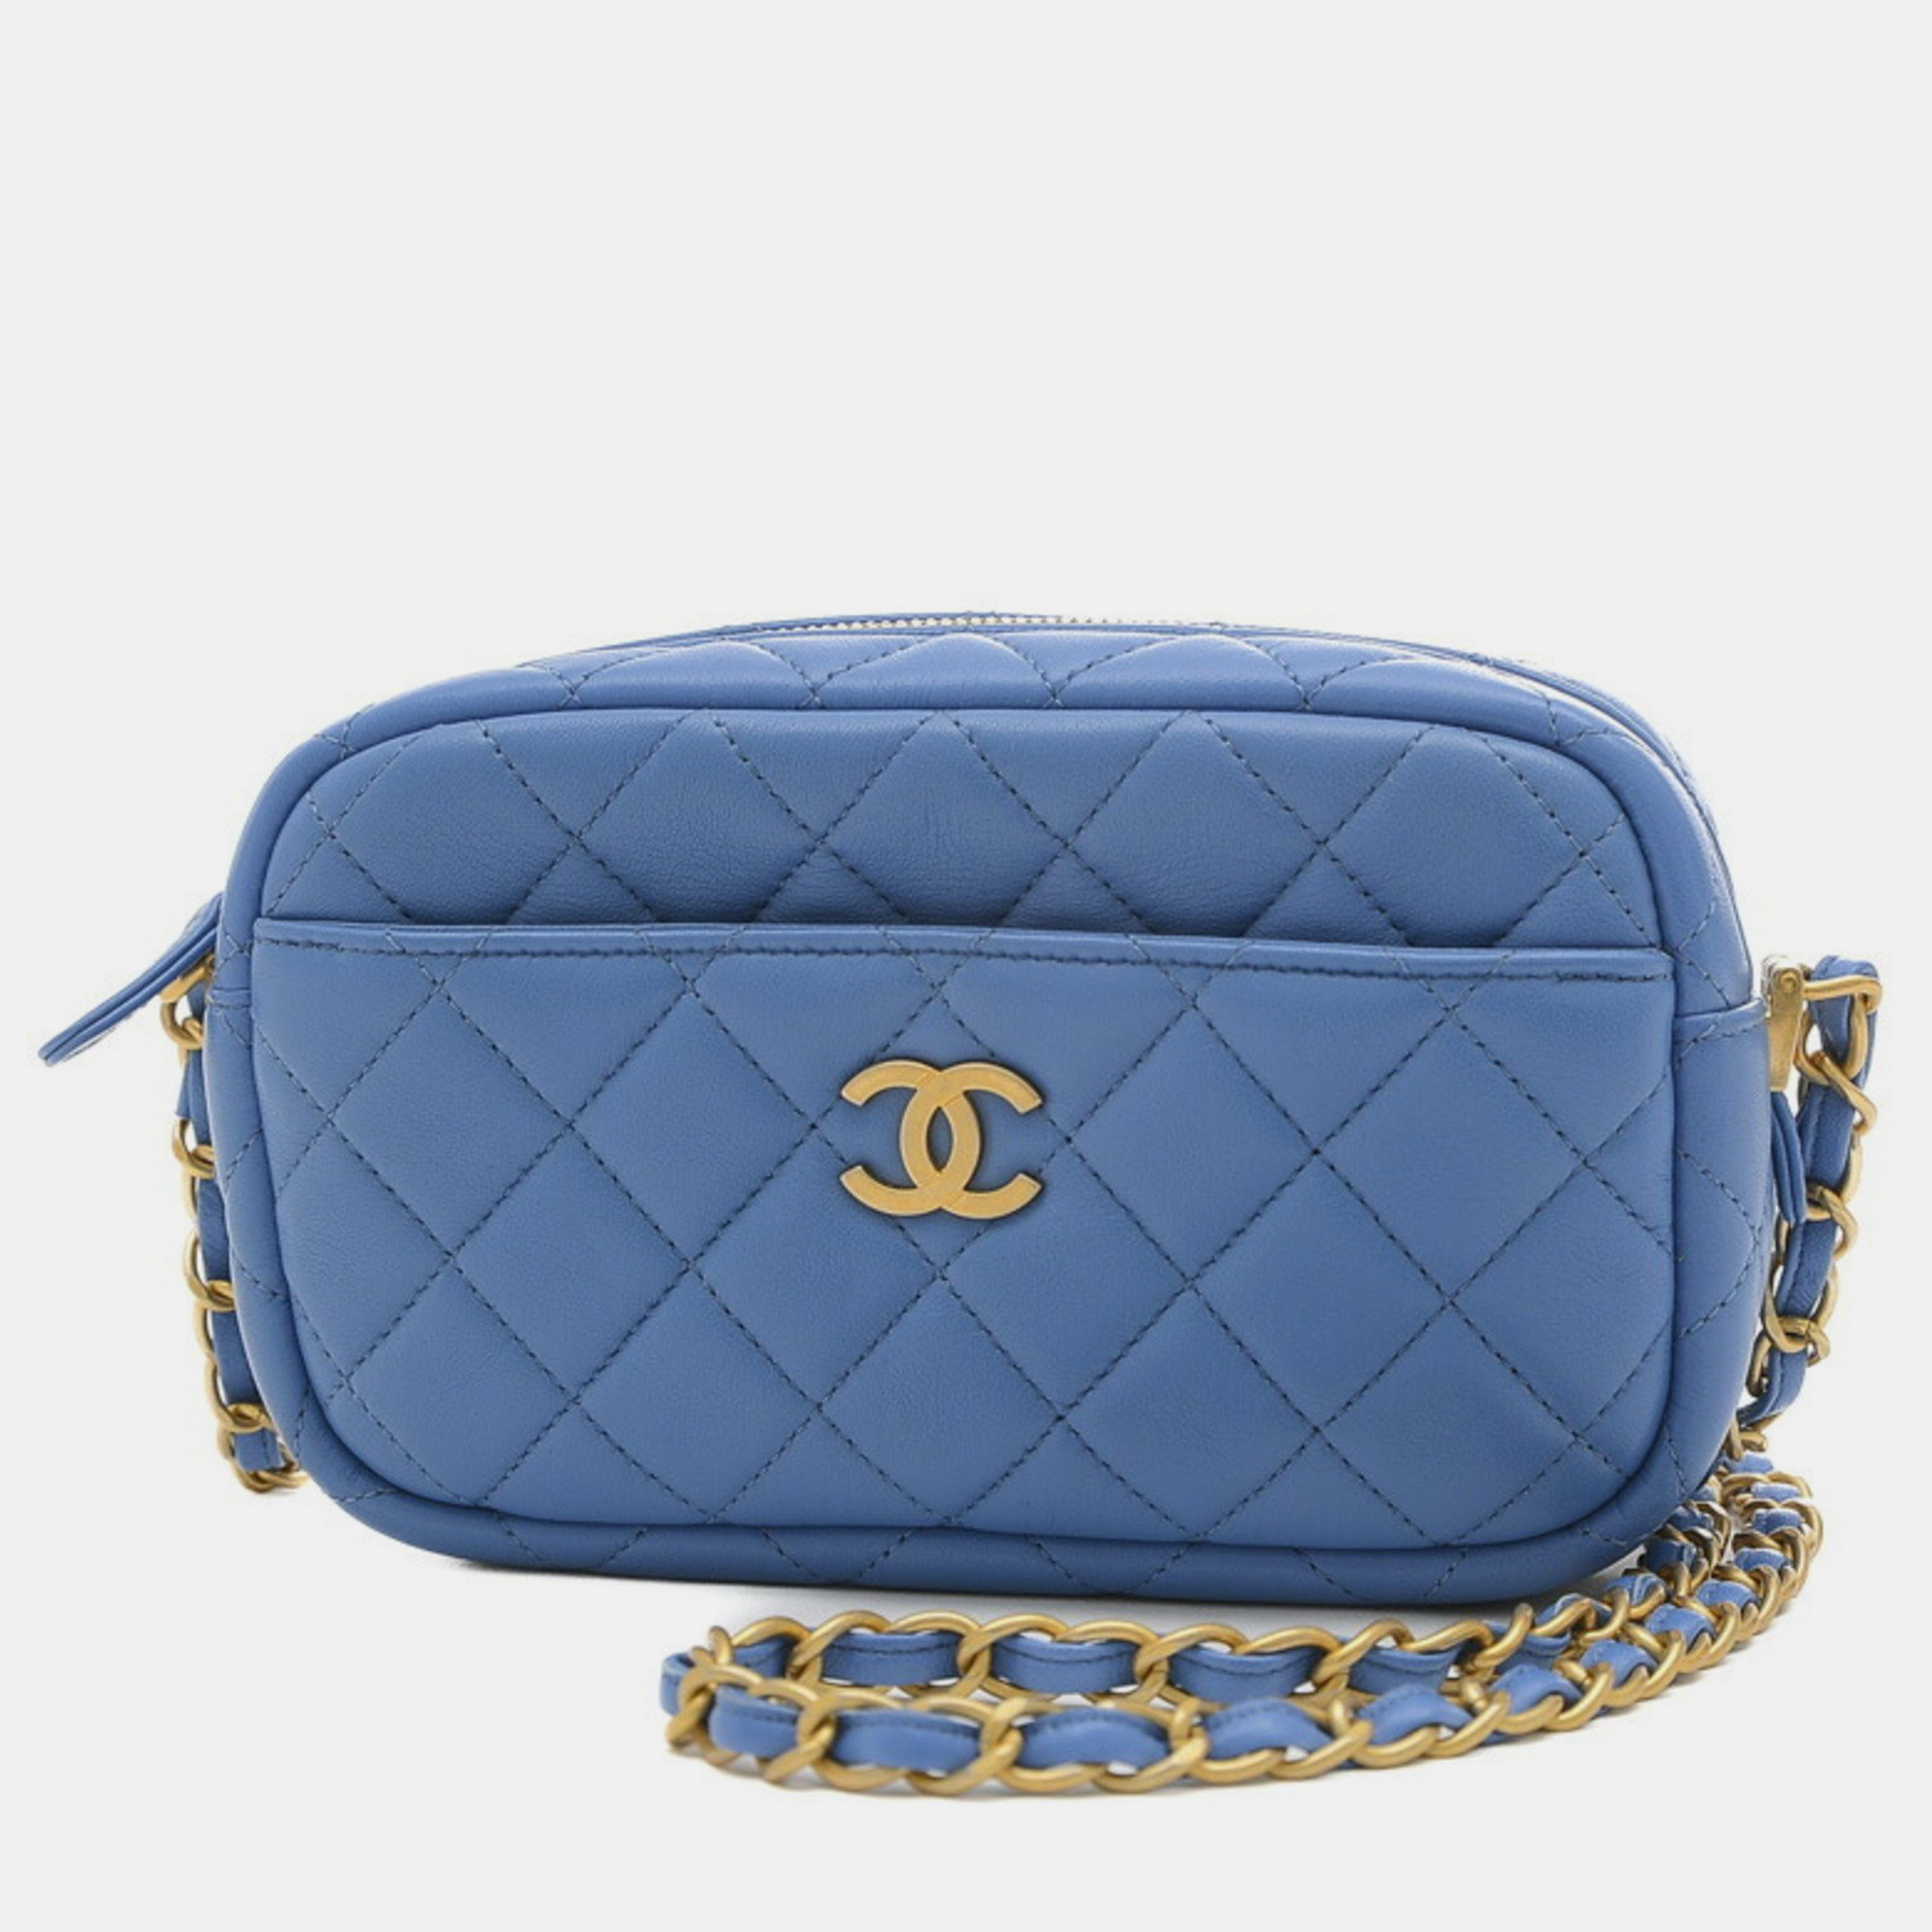 Chanel blue quilted lambskin mini camera case bag